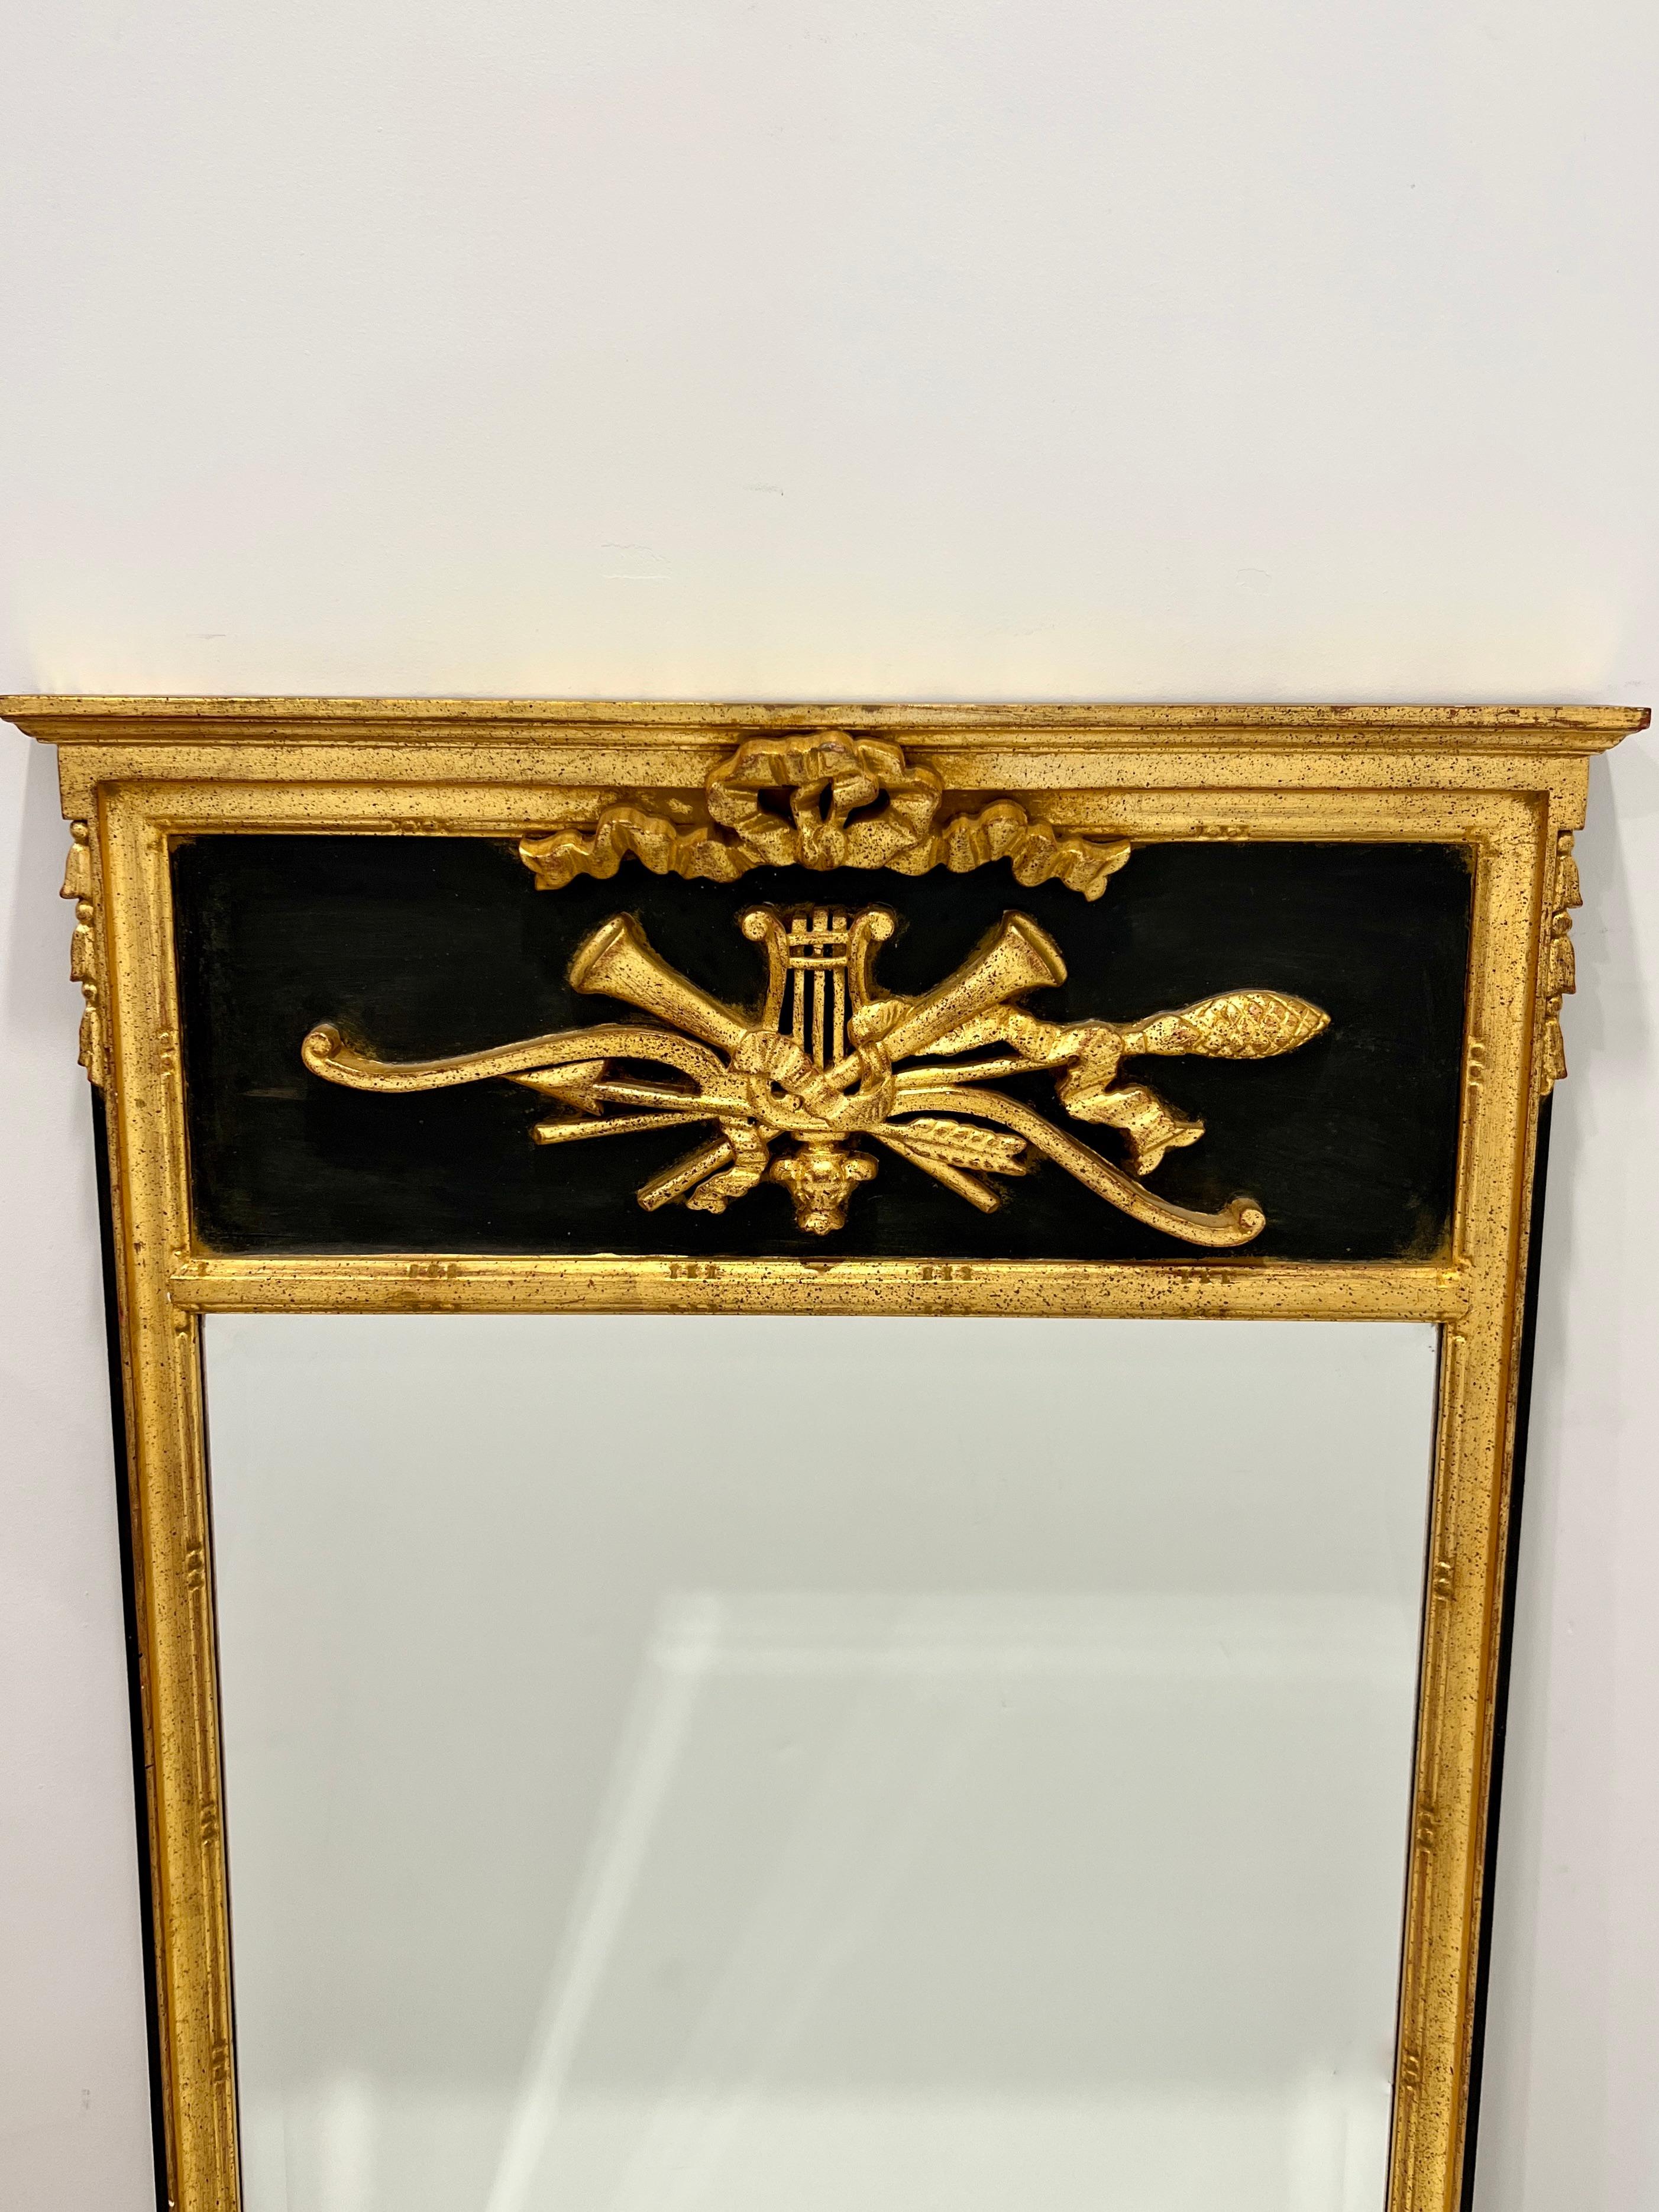 Beveled Louis XVI Neoclassical Trumeau Mirror with Giltwood and Black Frame